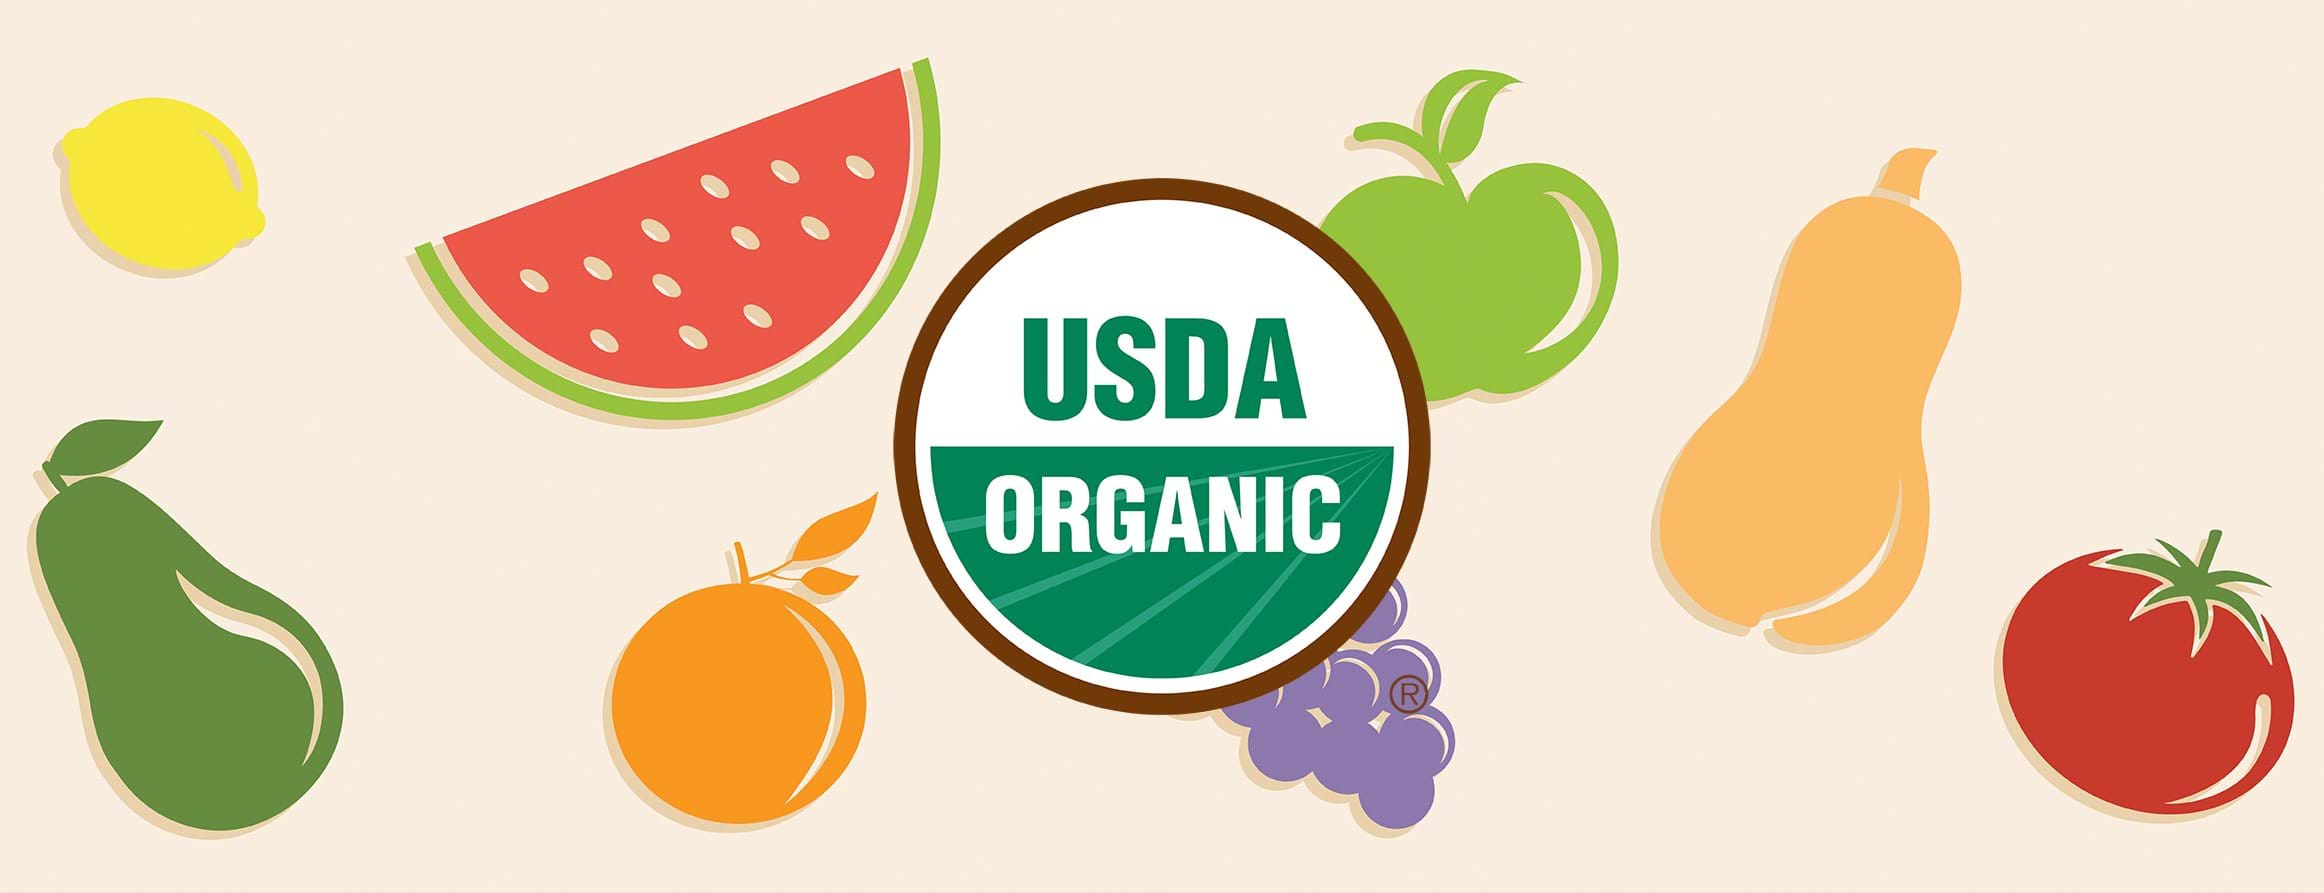 Illustration of fruits and vegetables with USDA Organic logo in the foreground.